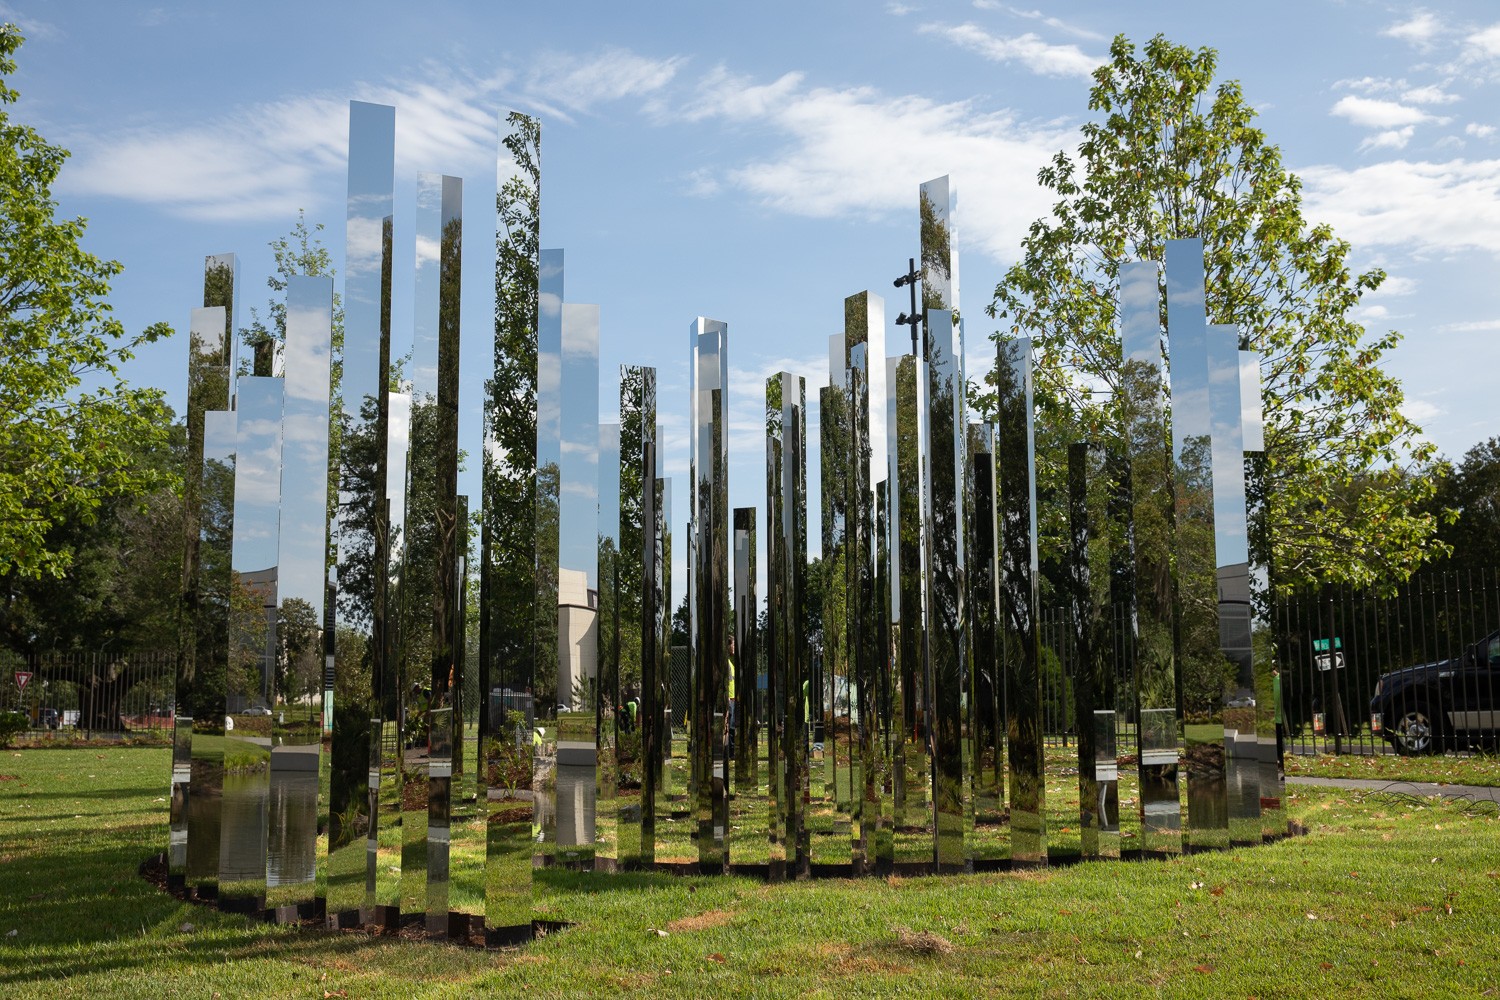 A mirrored labyrinth by Jeppe Hein in the Sydney and Walda Besthoff Sculpture Garden, at the New Orleans Museum of Art (Noma), in Louisiana, the United States. Photo: Noma